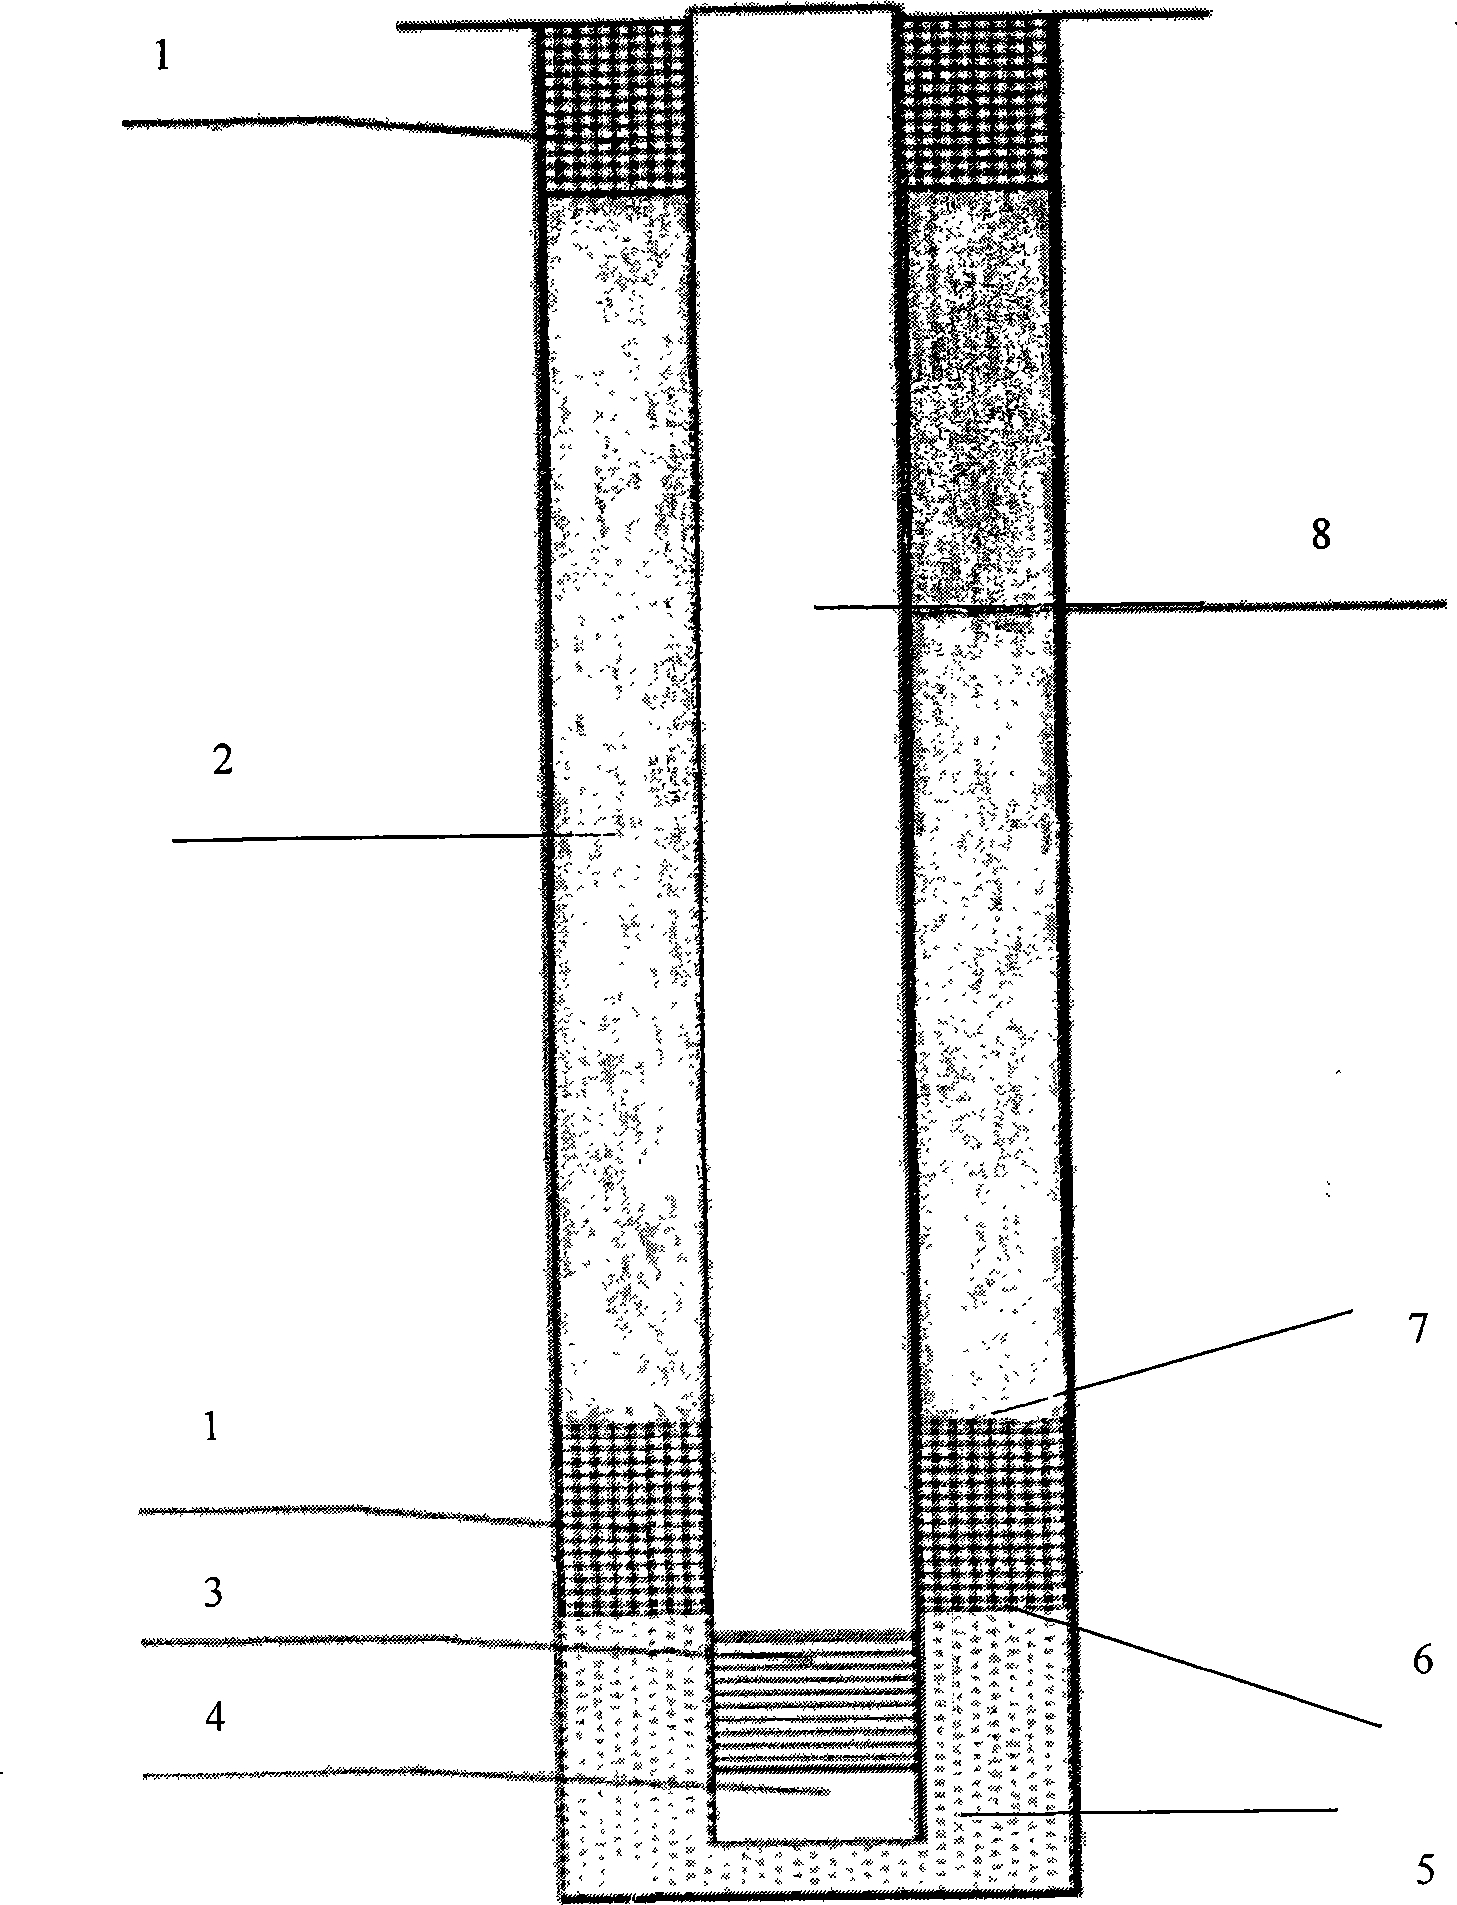 Well completion method of ground dipping uranium extracting process well